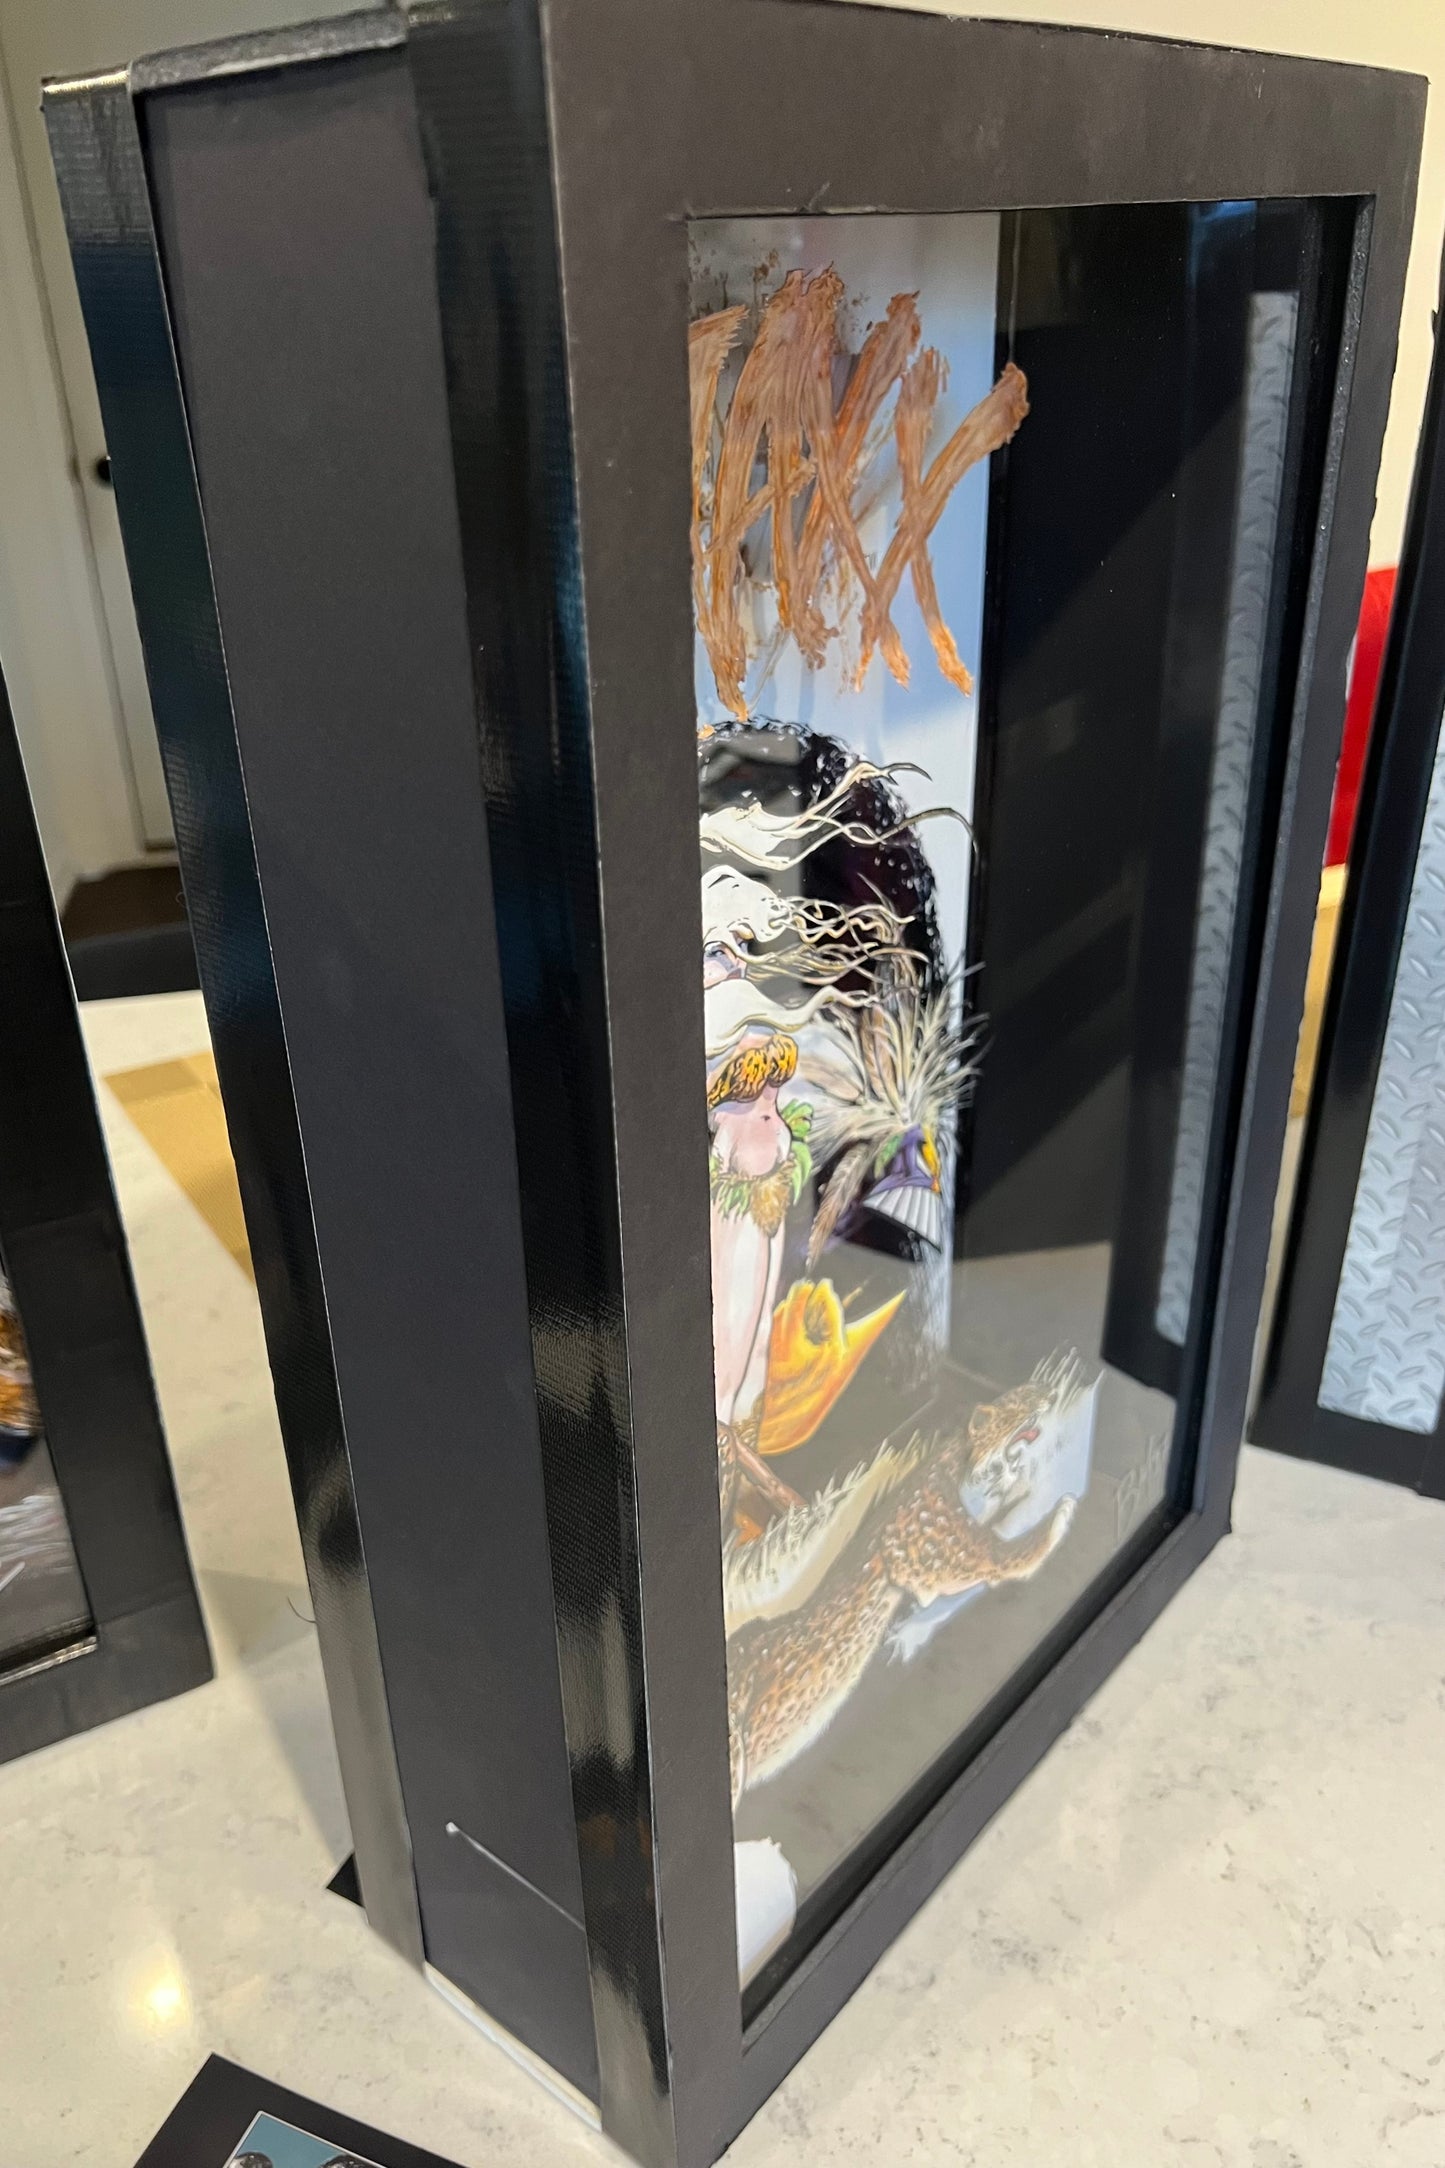 The Maxx Shadowbox by Barry (A One of a Kind Shadowbox Art)